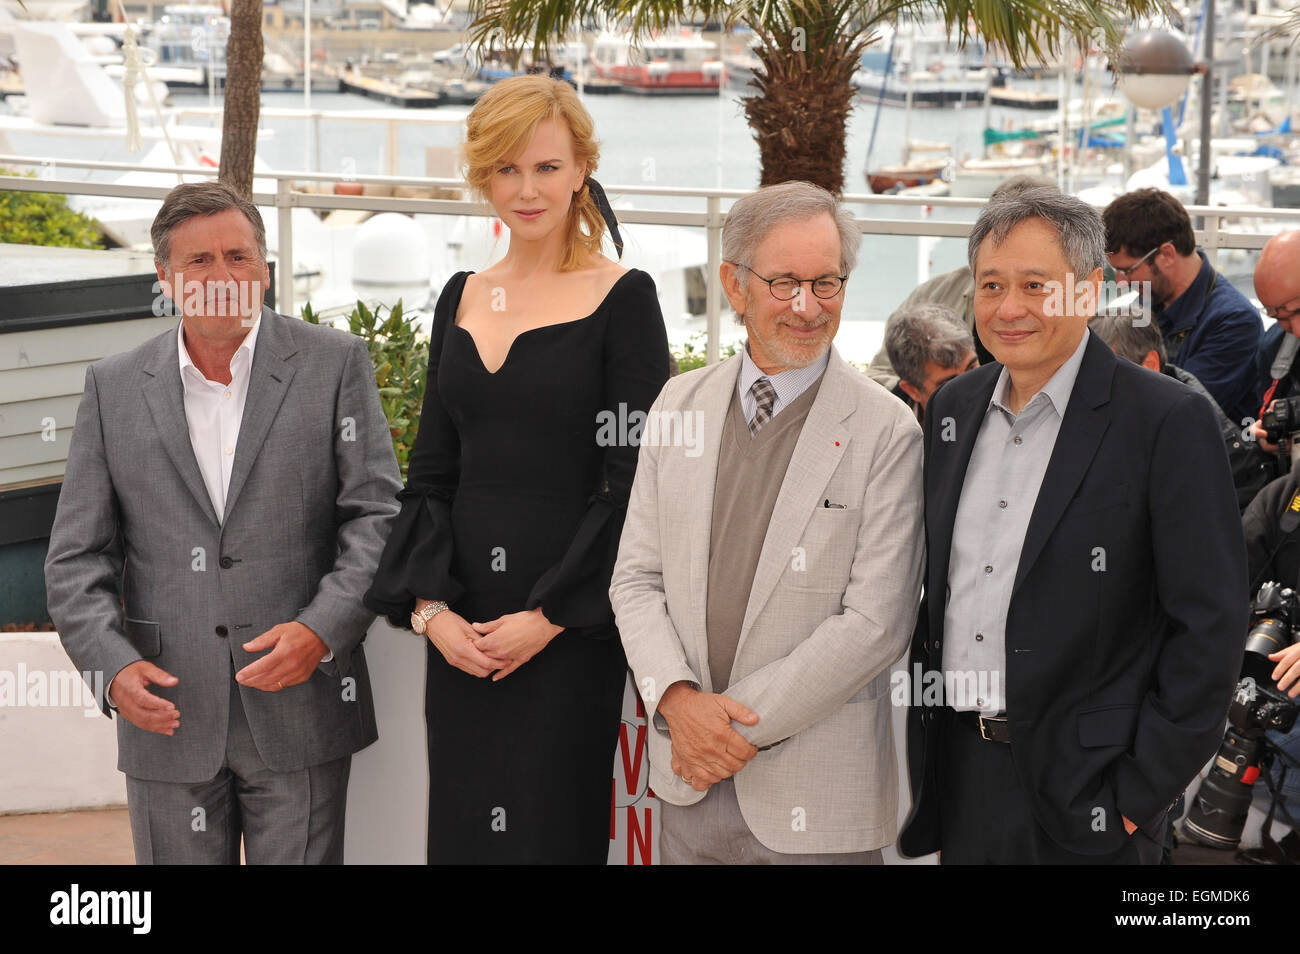 CANNES, FRANCE - MAY 15, 2013: Daniel Auteuil (left), Nicole Kidman, Steven Spielberg & Ang Lee at the photocall for the Jury of the 66th Festival de Cannes. Stock Photo